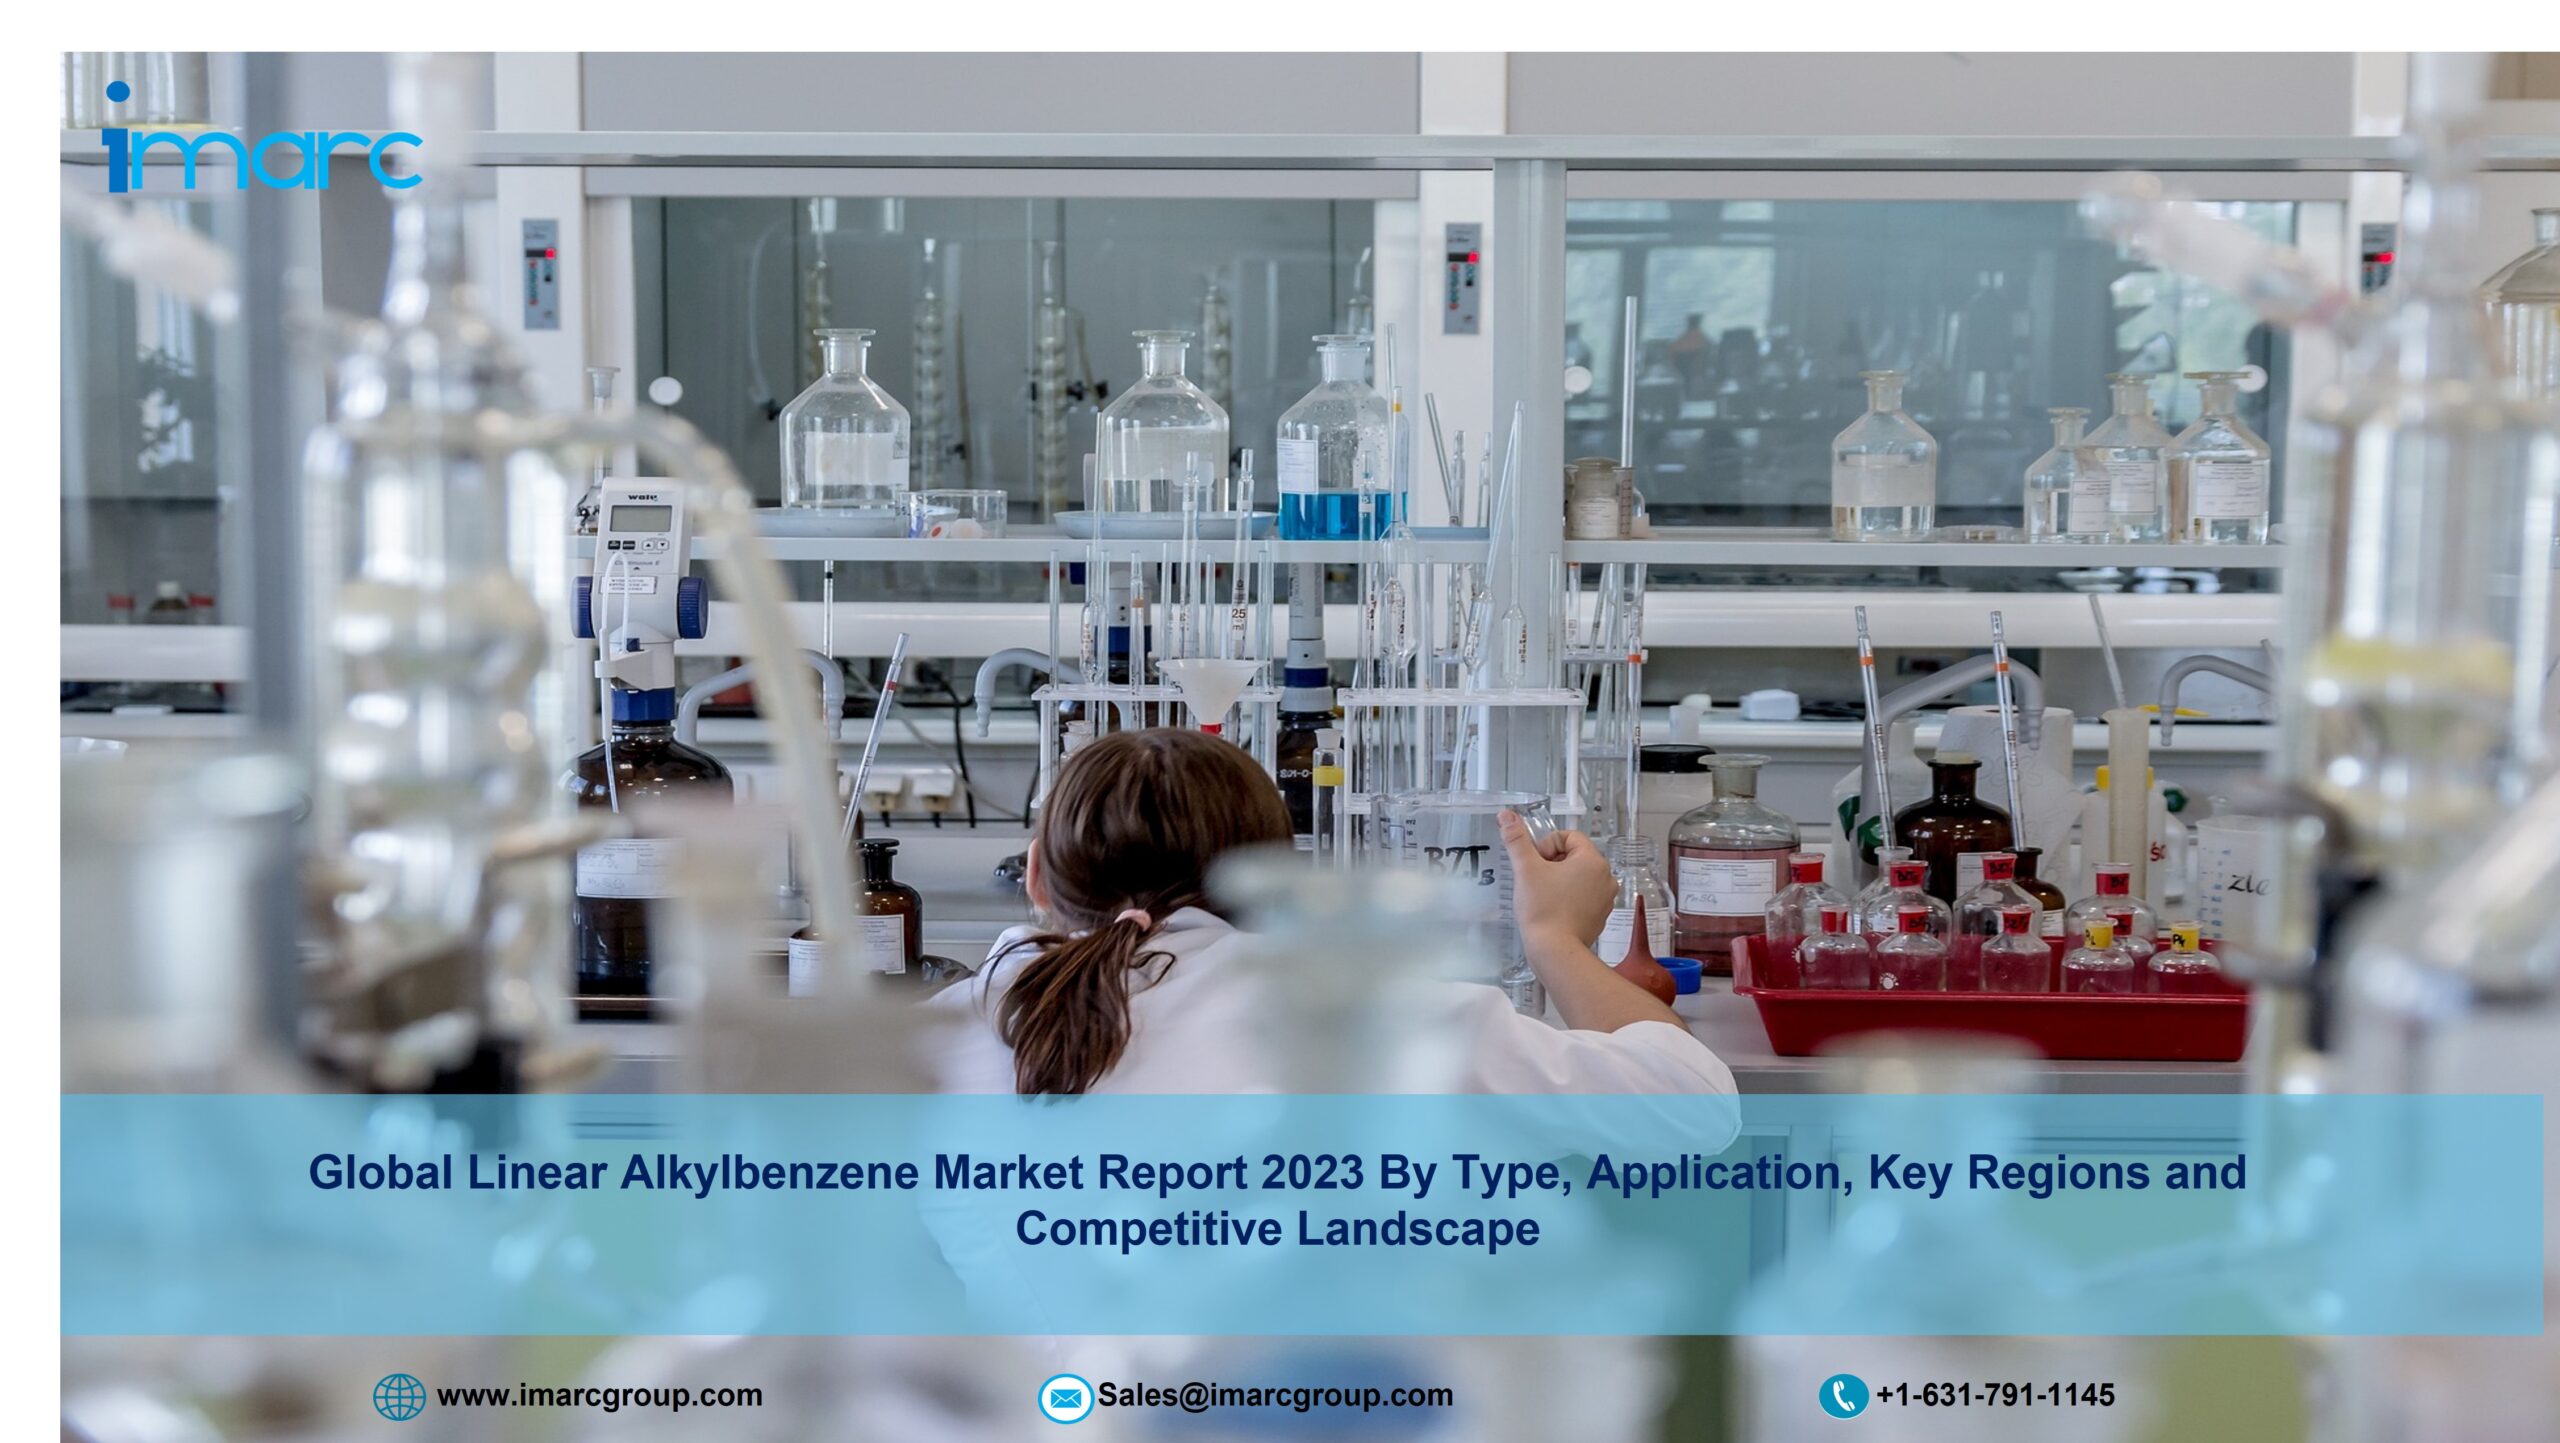 Emerging Trends and Forecasts in the Global Linear Alkylbenzene (LAB) Market